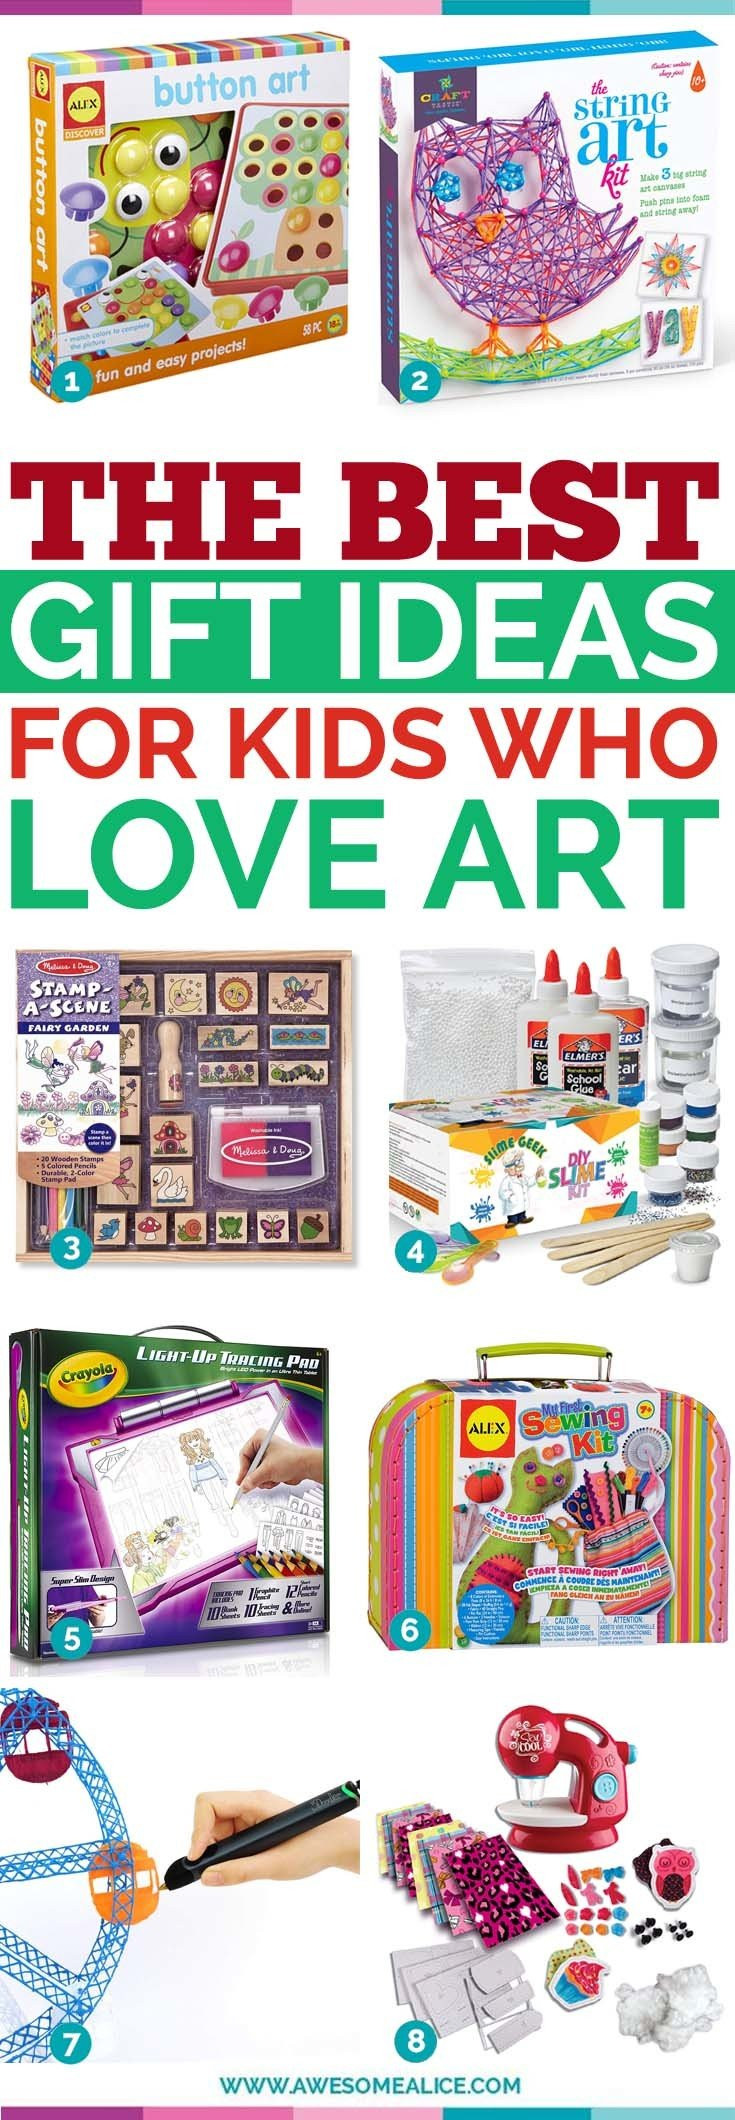 Great Gift Ideas For Kids
 Top 30 Gift Ideas for Creative Kids Who Love Art